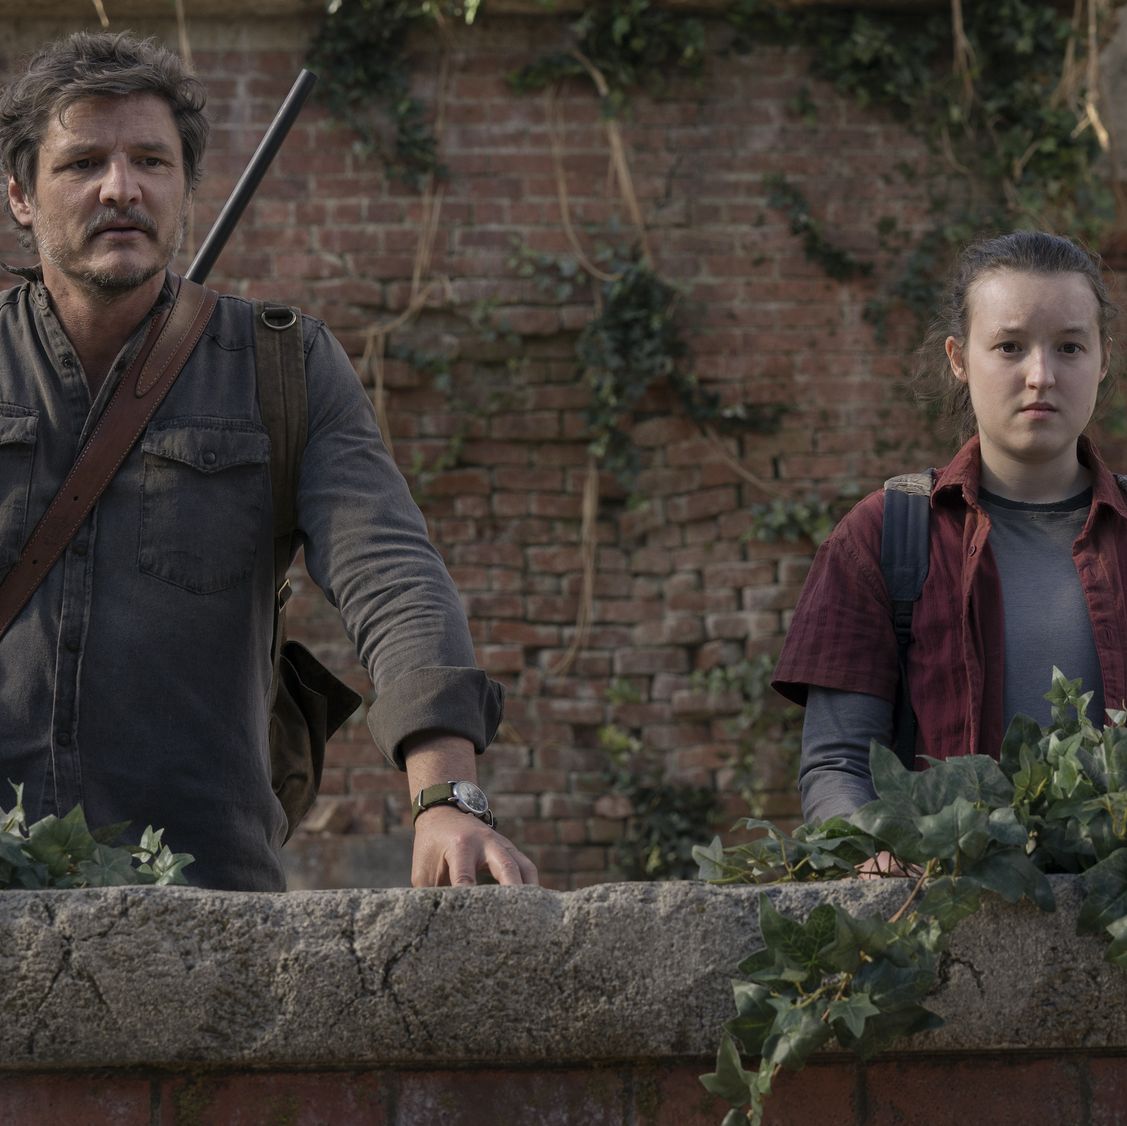 HBO's The Last Of Us Episode 4 & Episode 5 Arrives This Week